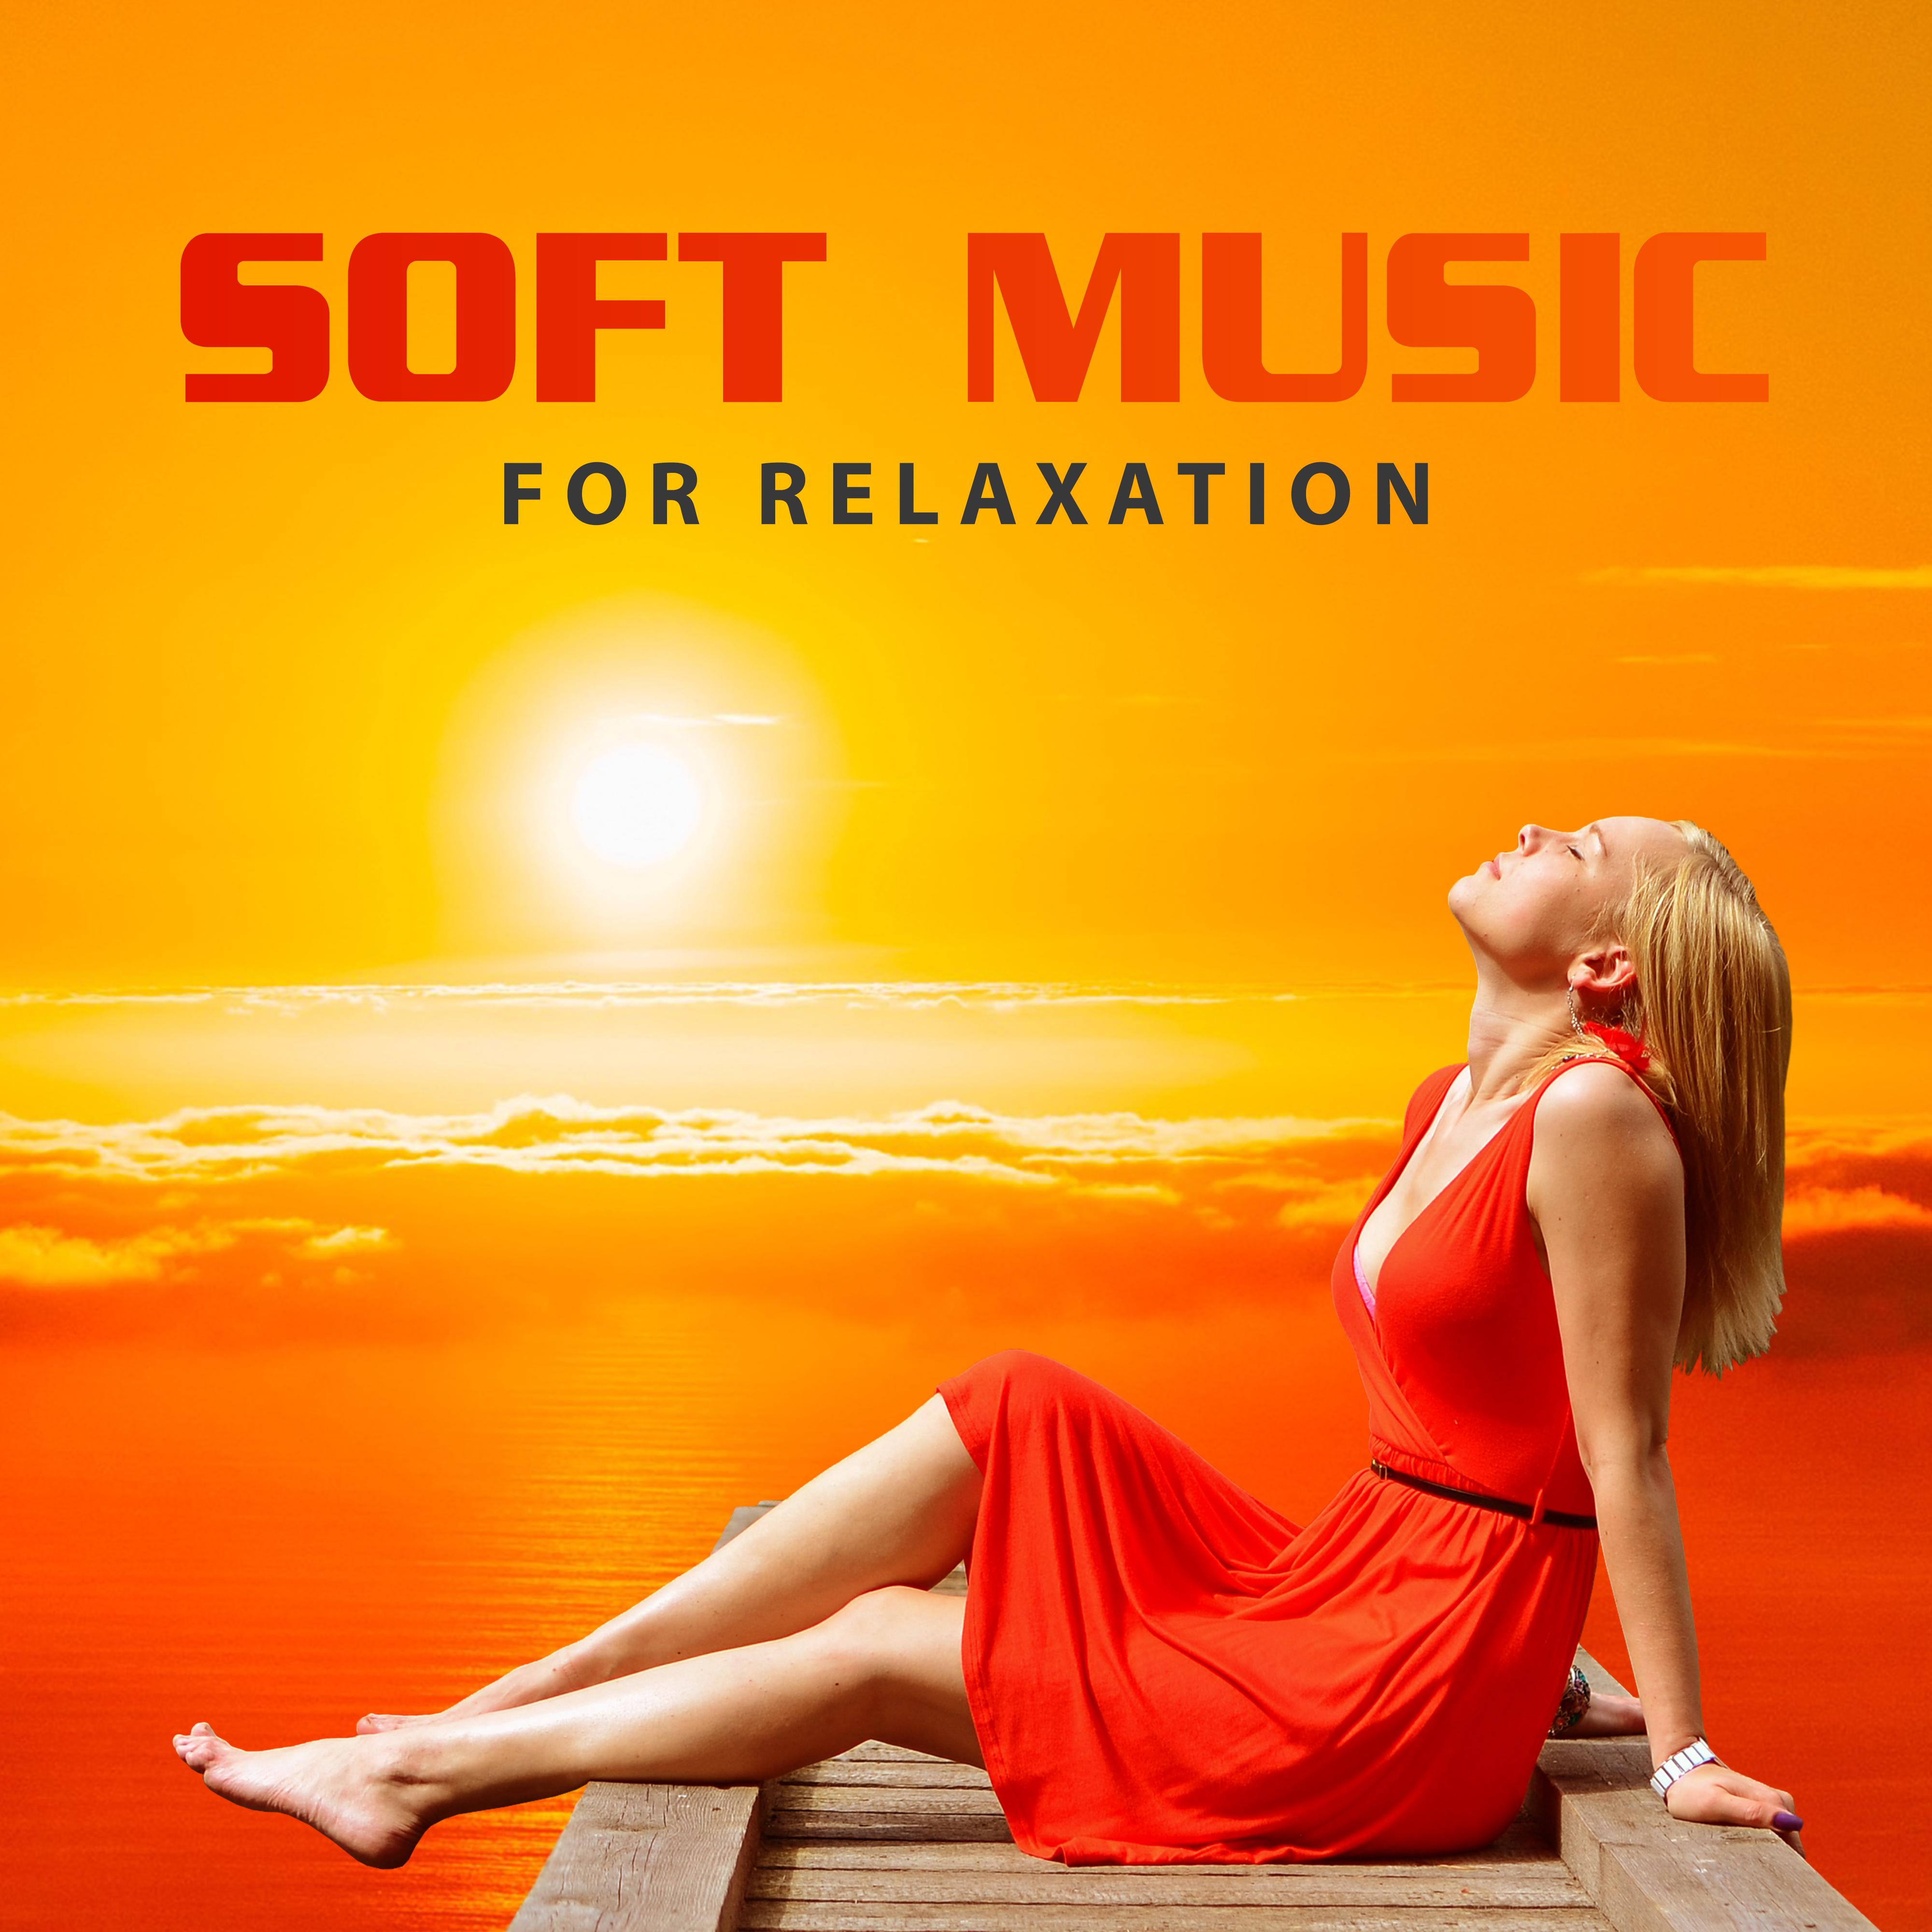 Soft Music for Relaxation – Stress Relief, Waves of Calmness, Inner Peace, New Age Music